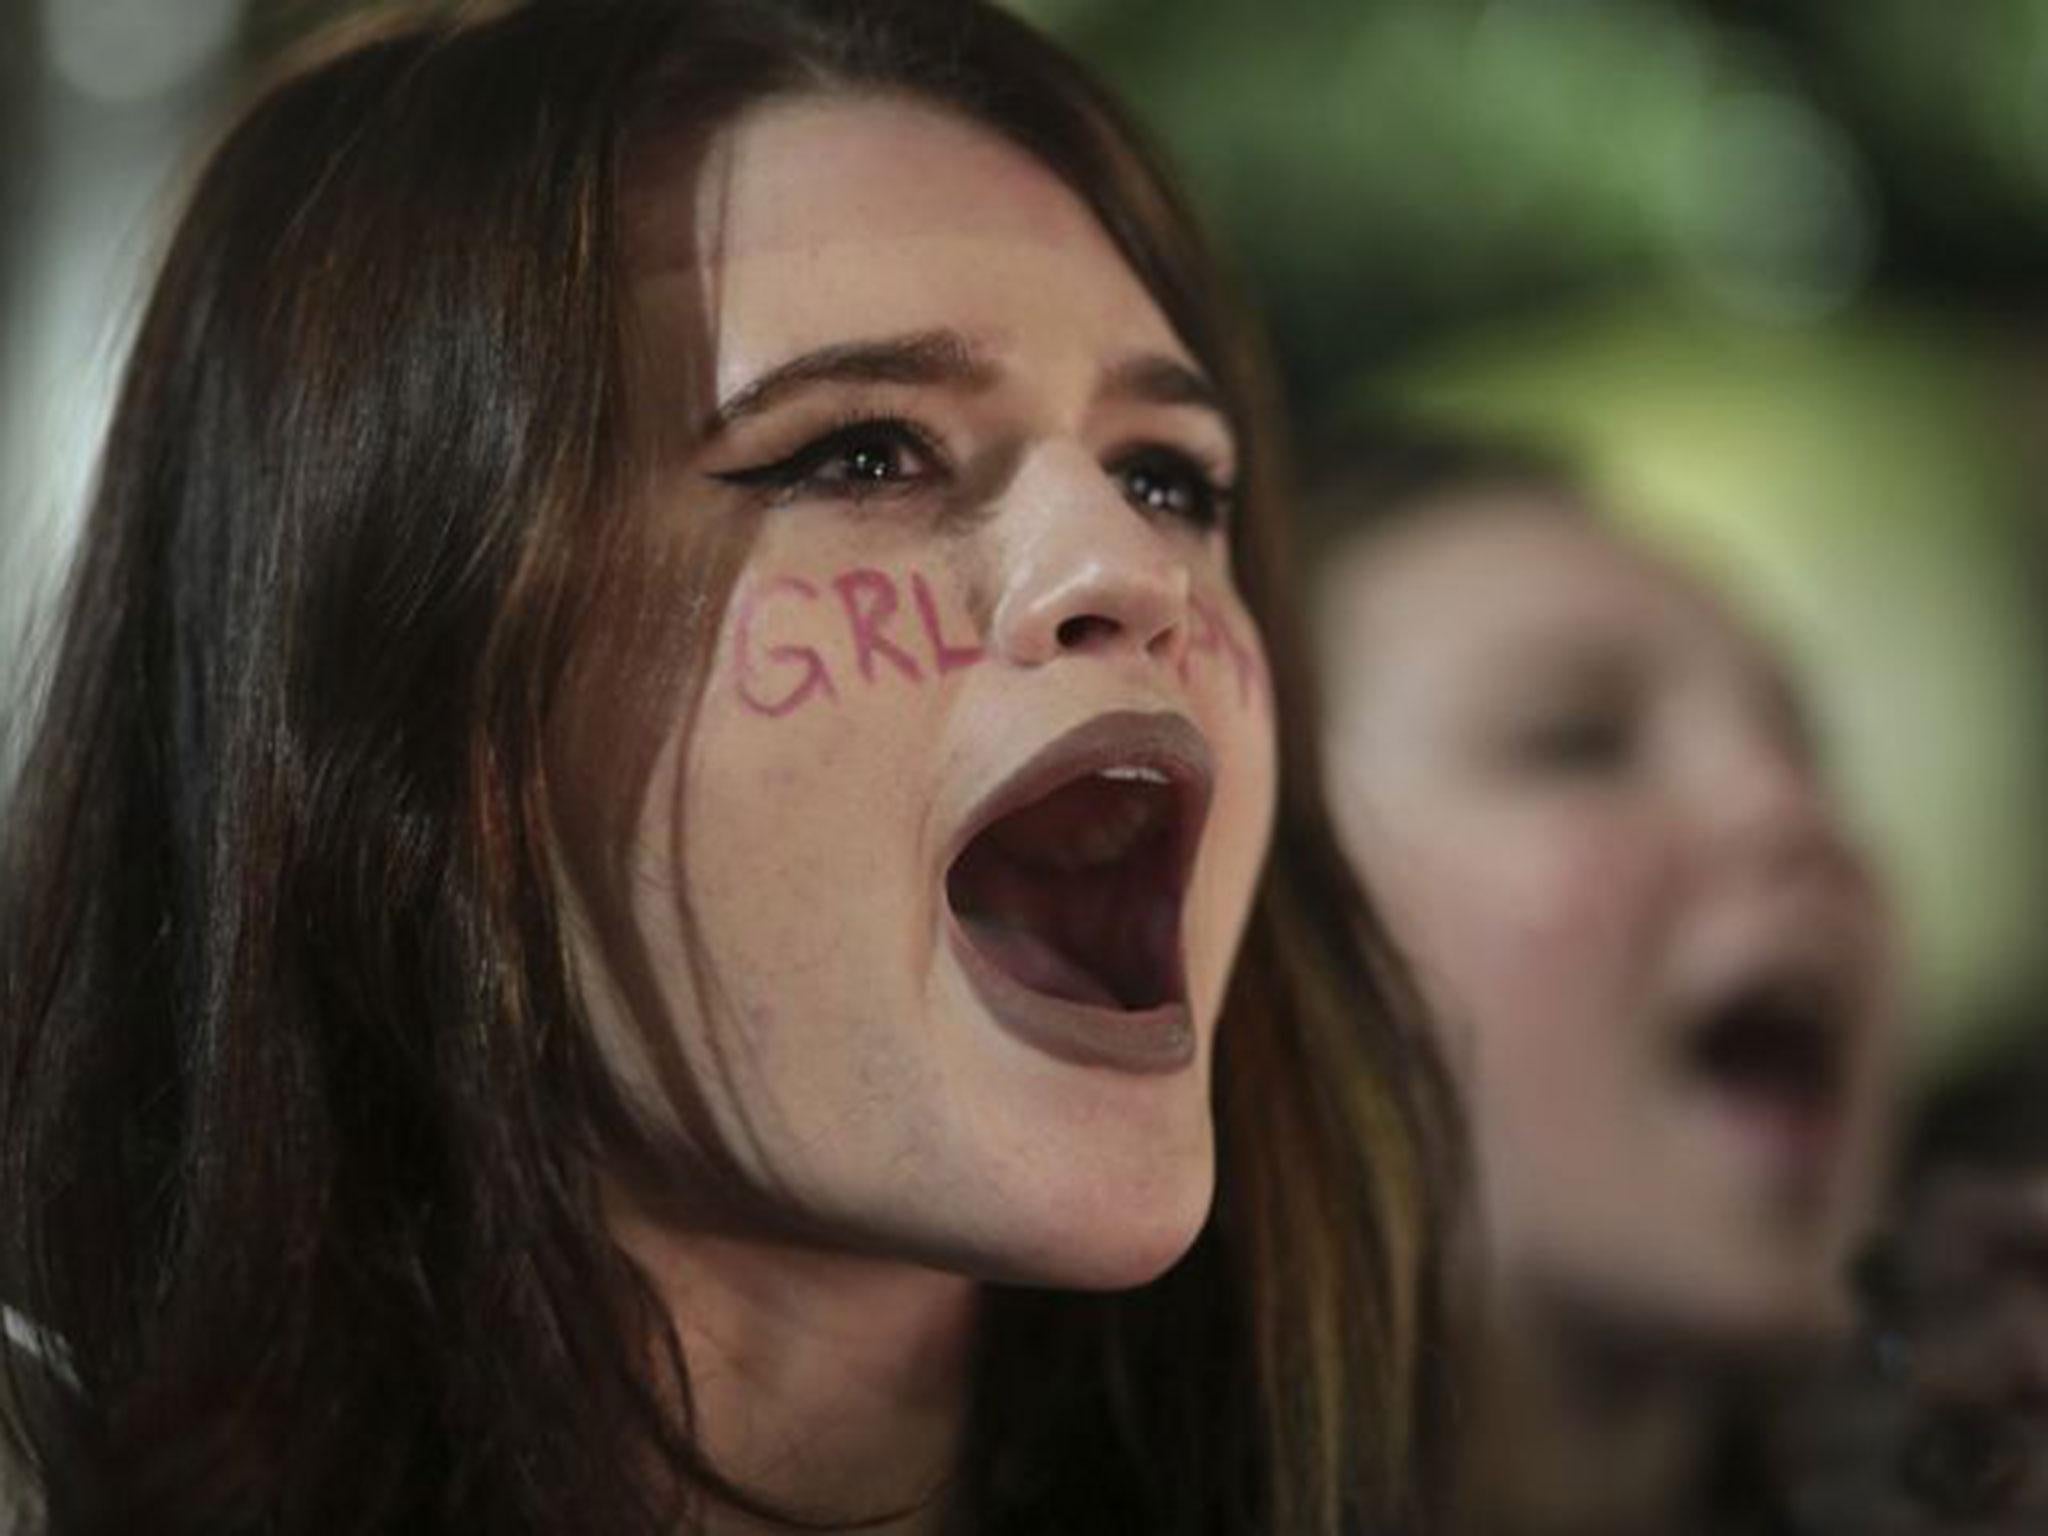 Morgan Riemersma chants "not my president" during a protest in opposition of Donald Trump's presidential election victory in Athens, Georgia